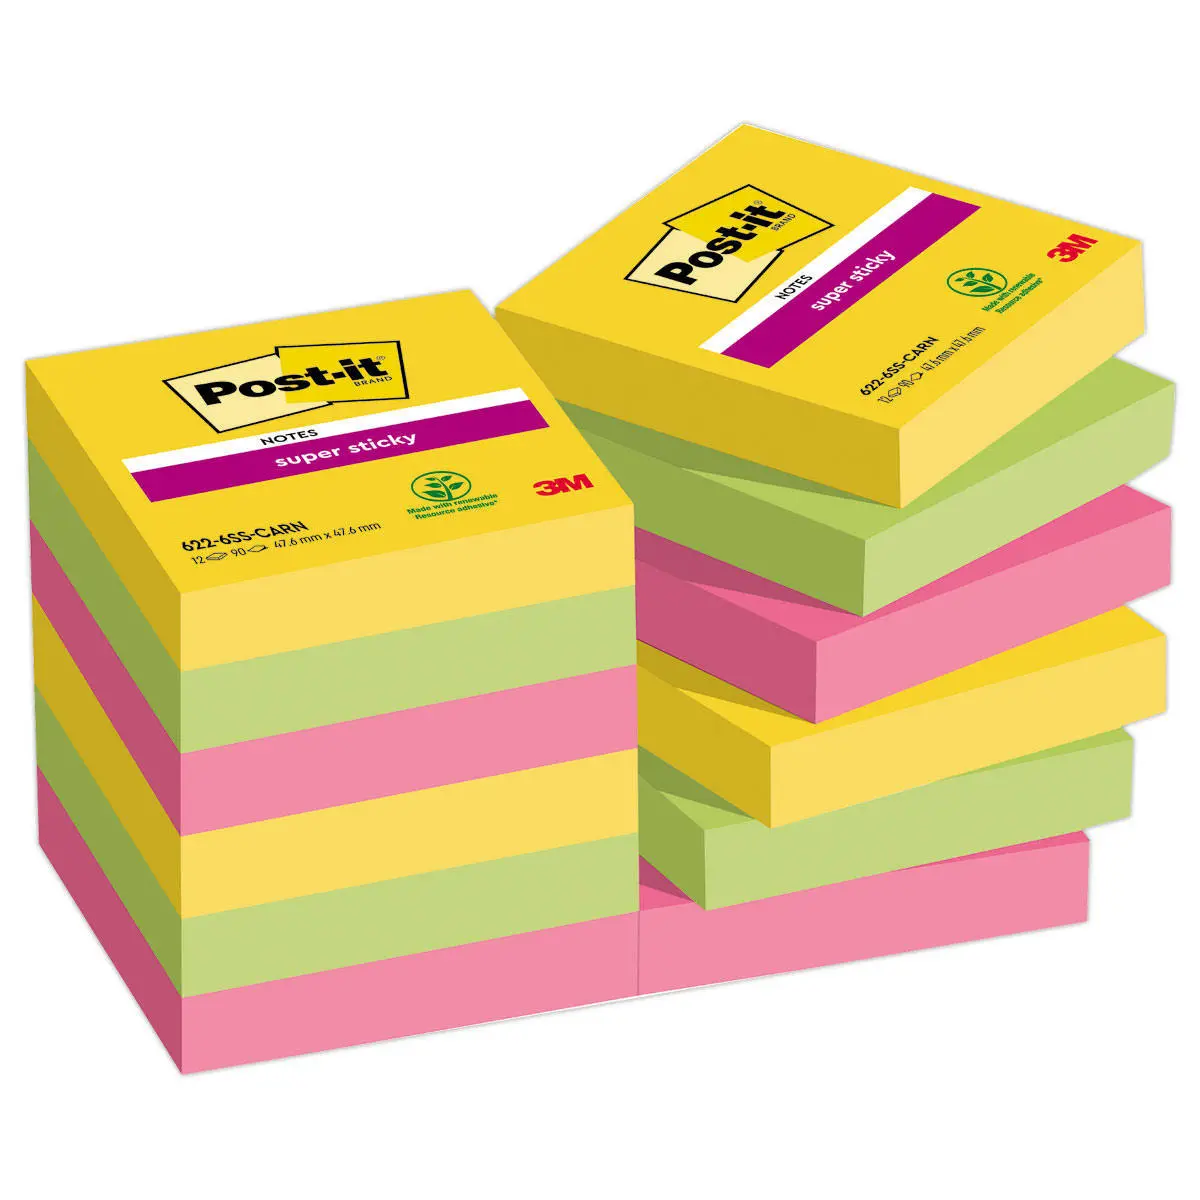 Notes repositionnables, Post-it et index - Fiducial Office Solutions